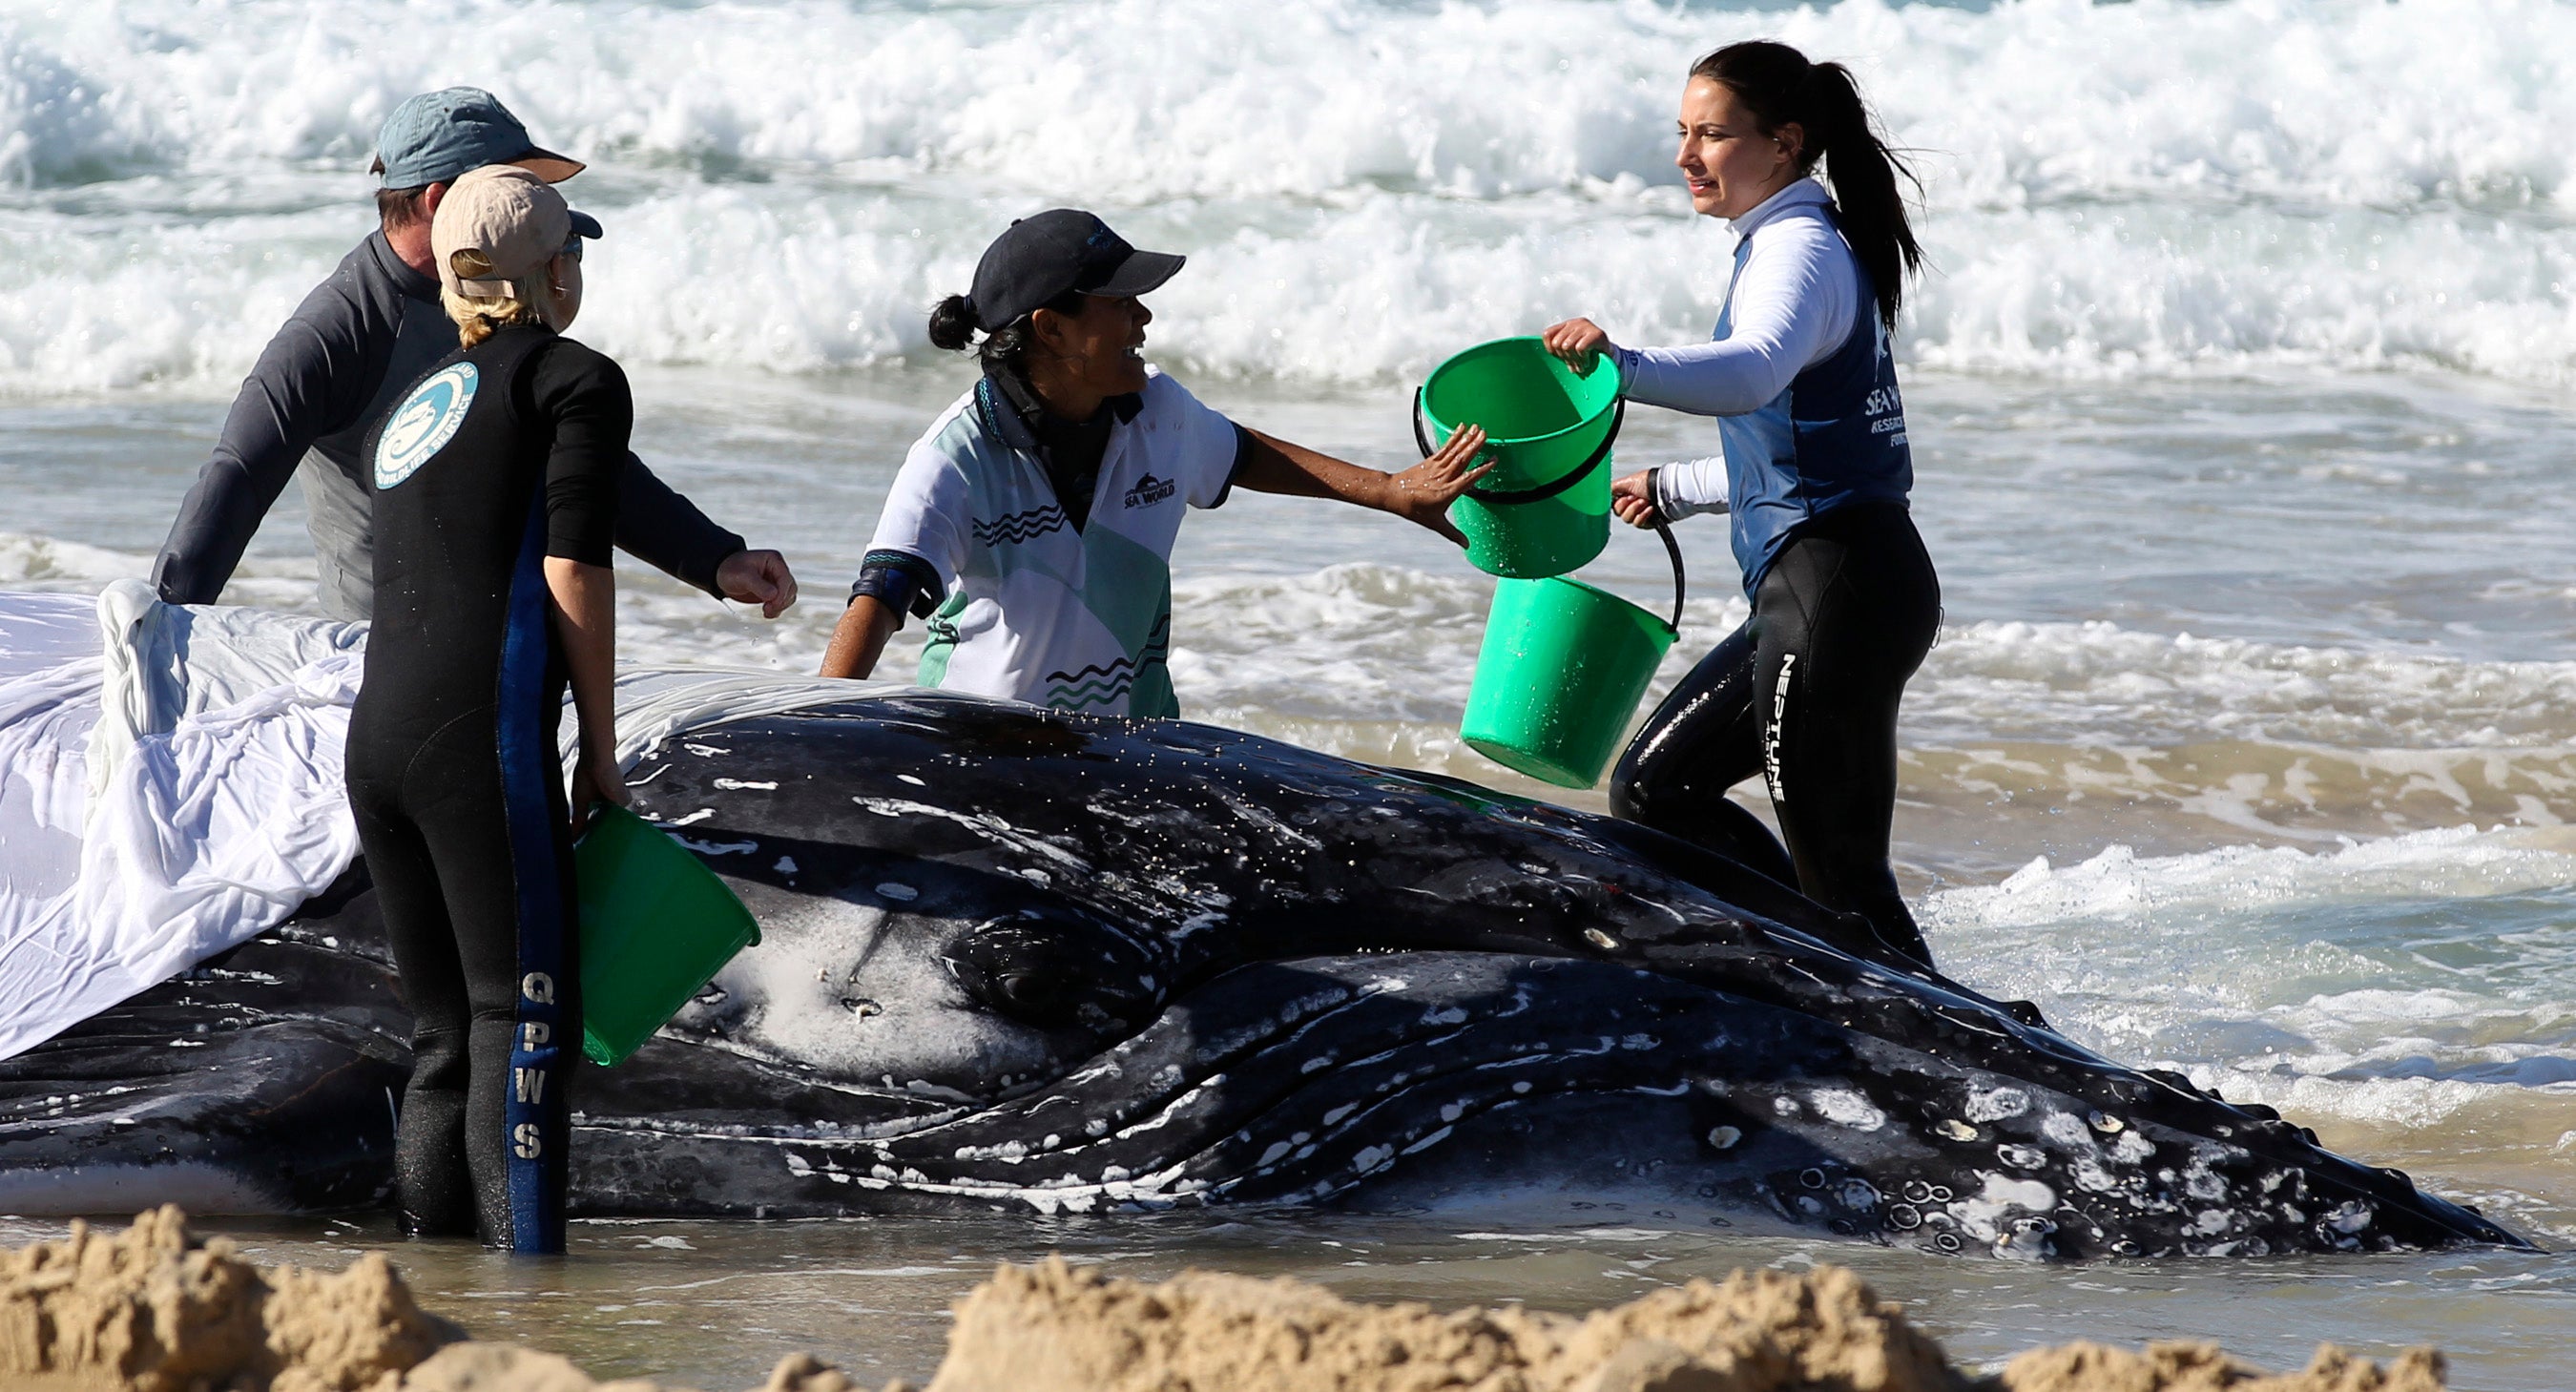 Rescuers try to help the stricken whale